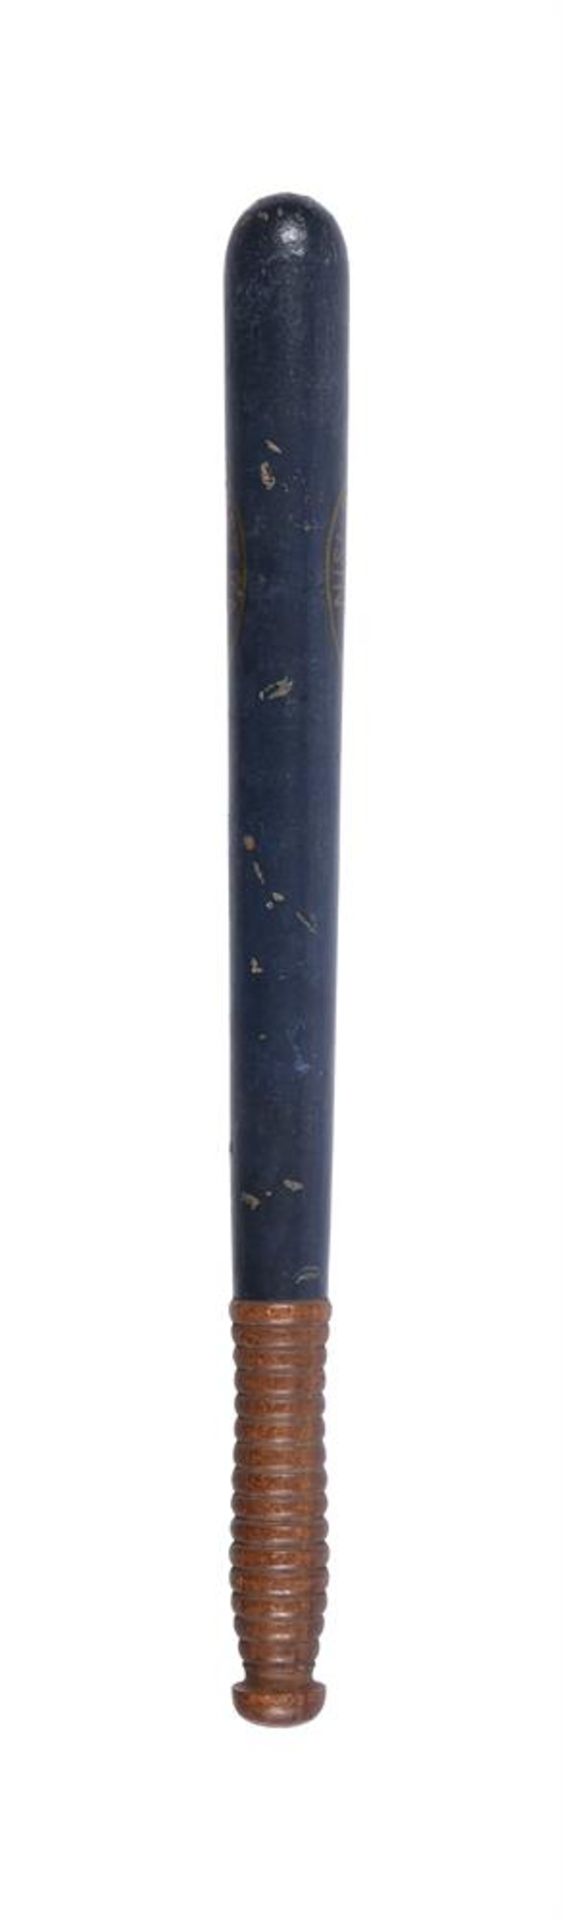 A VICTORIAN CITY OF EDINBURGH CONSTABULARY TRUNCHEON (DISTRICT 7) - Image 2 of 2